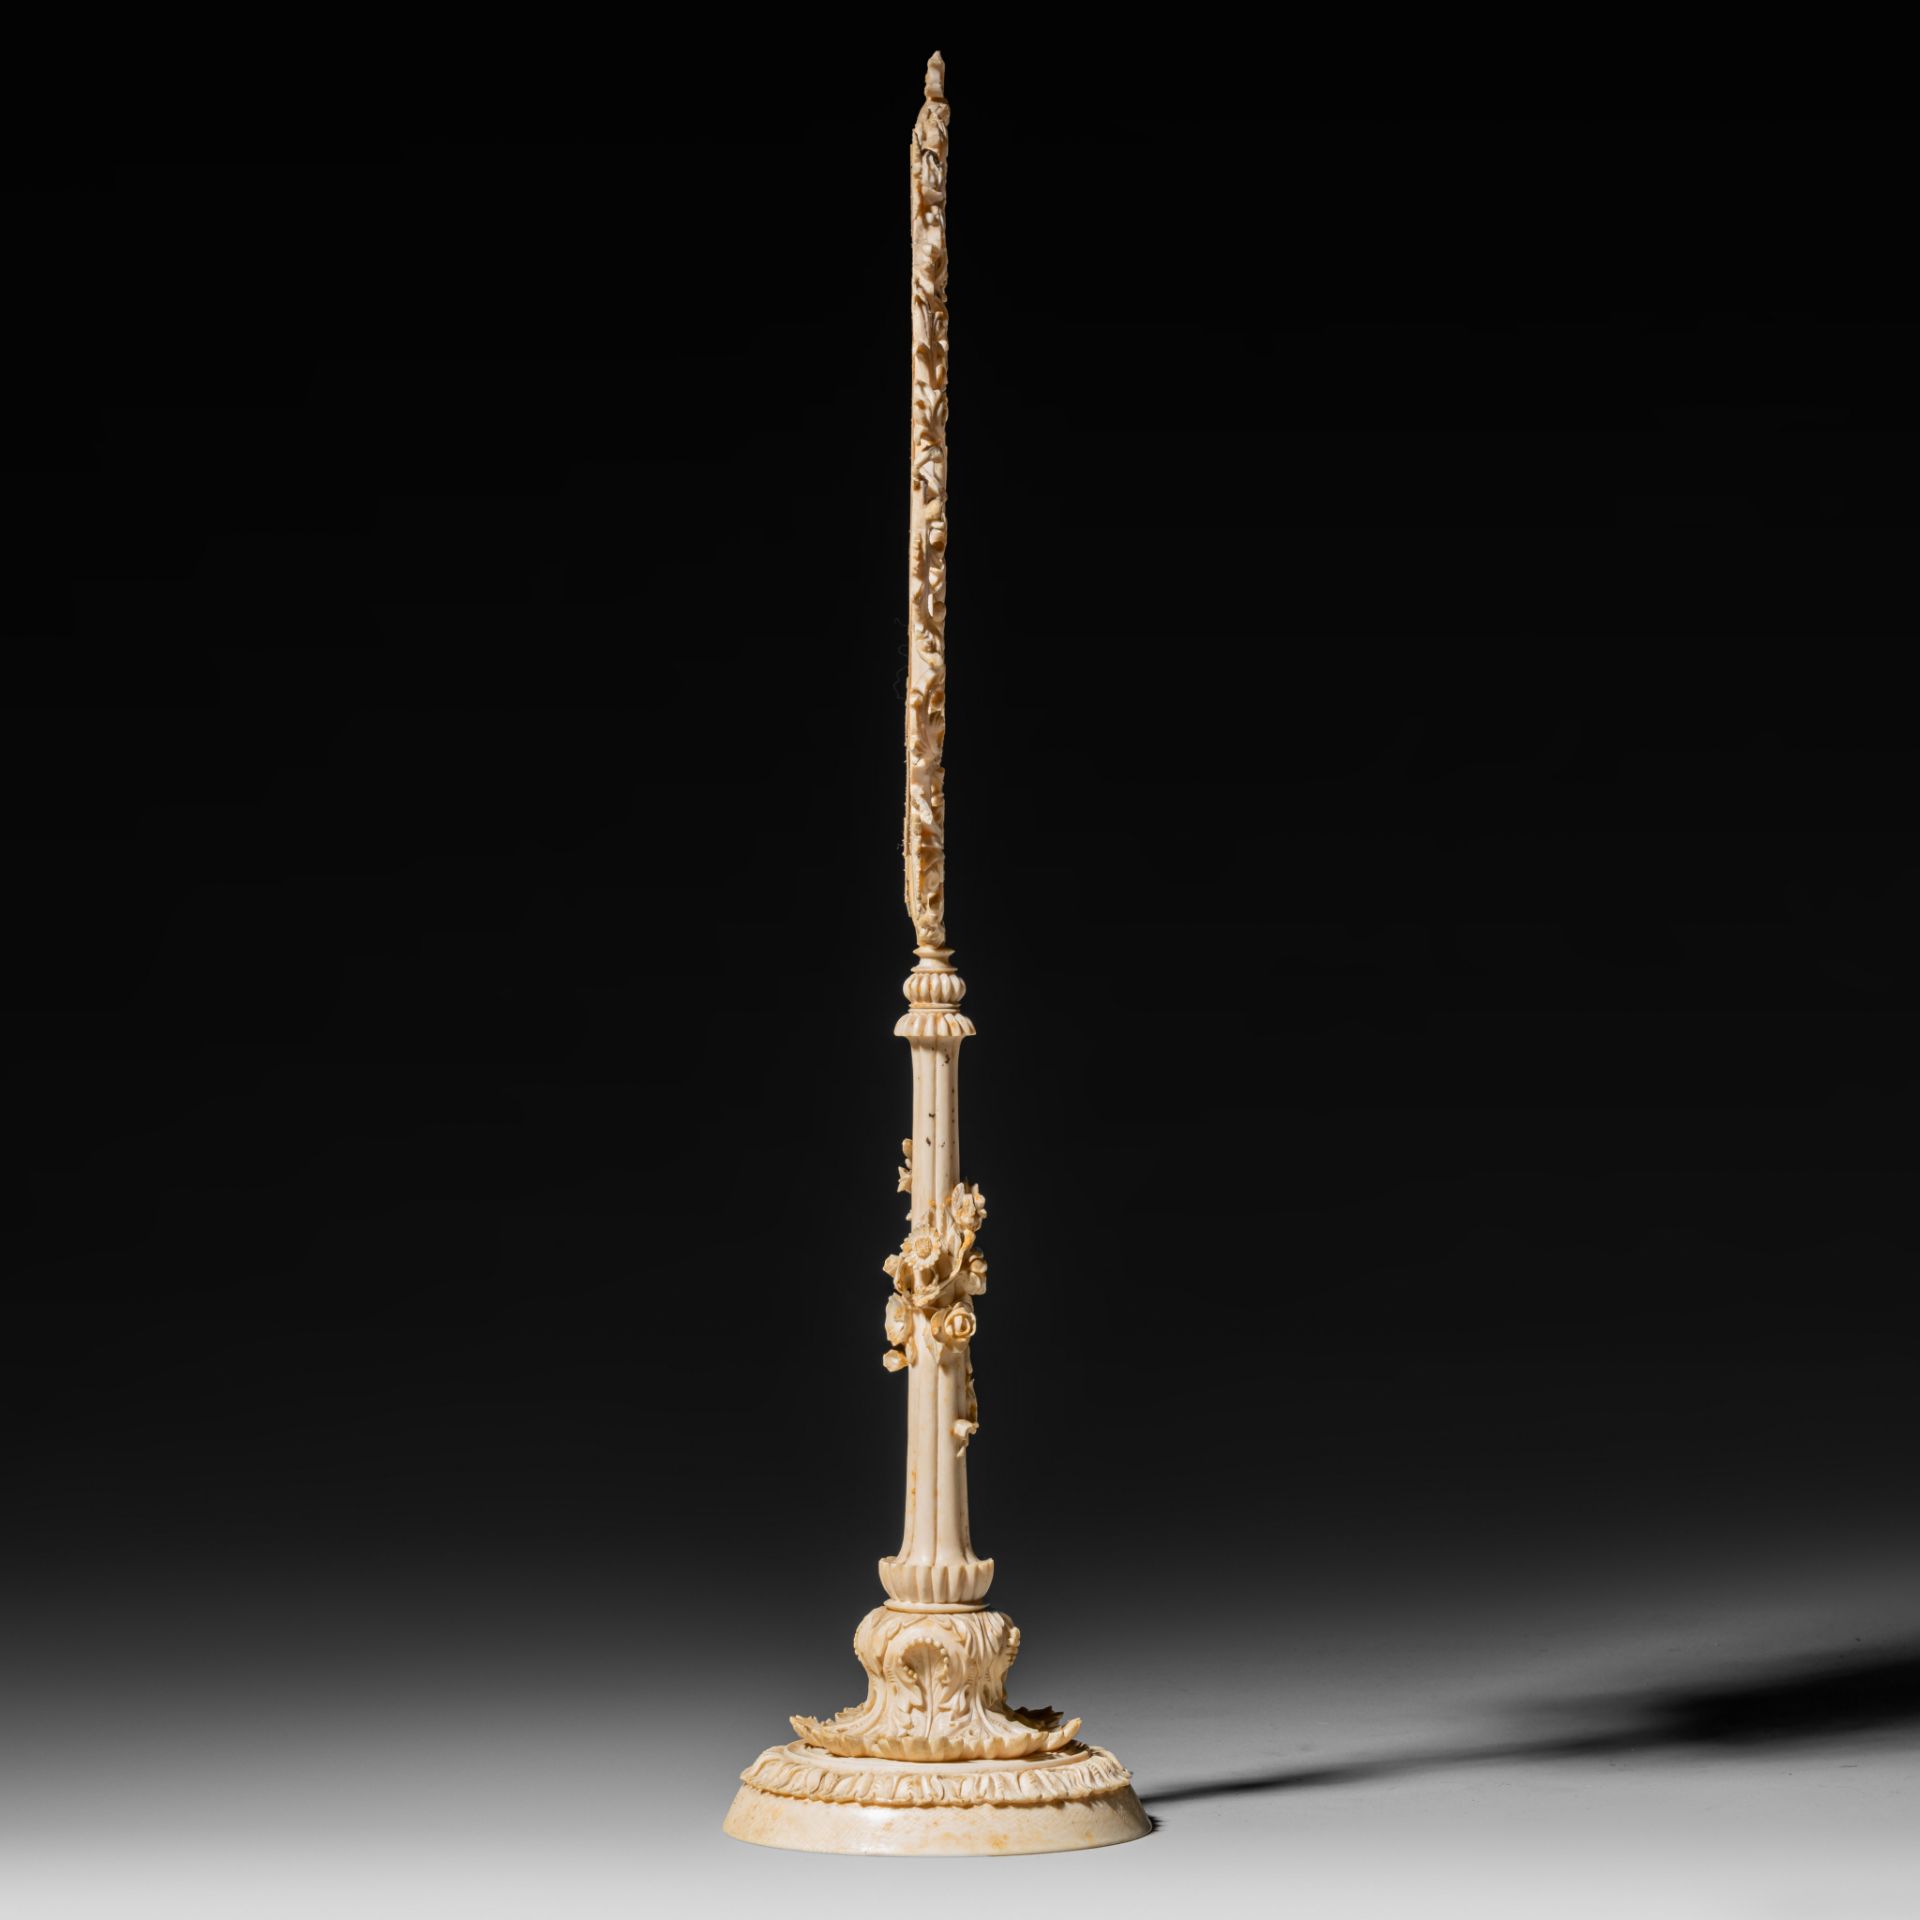 A 19thC, probably German, richly carved ivory candle screen, H 43,5 cm - 491 g (+) - Image 5 of 6